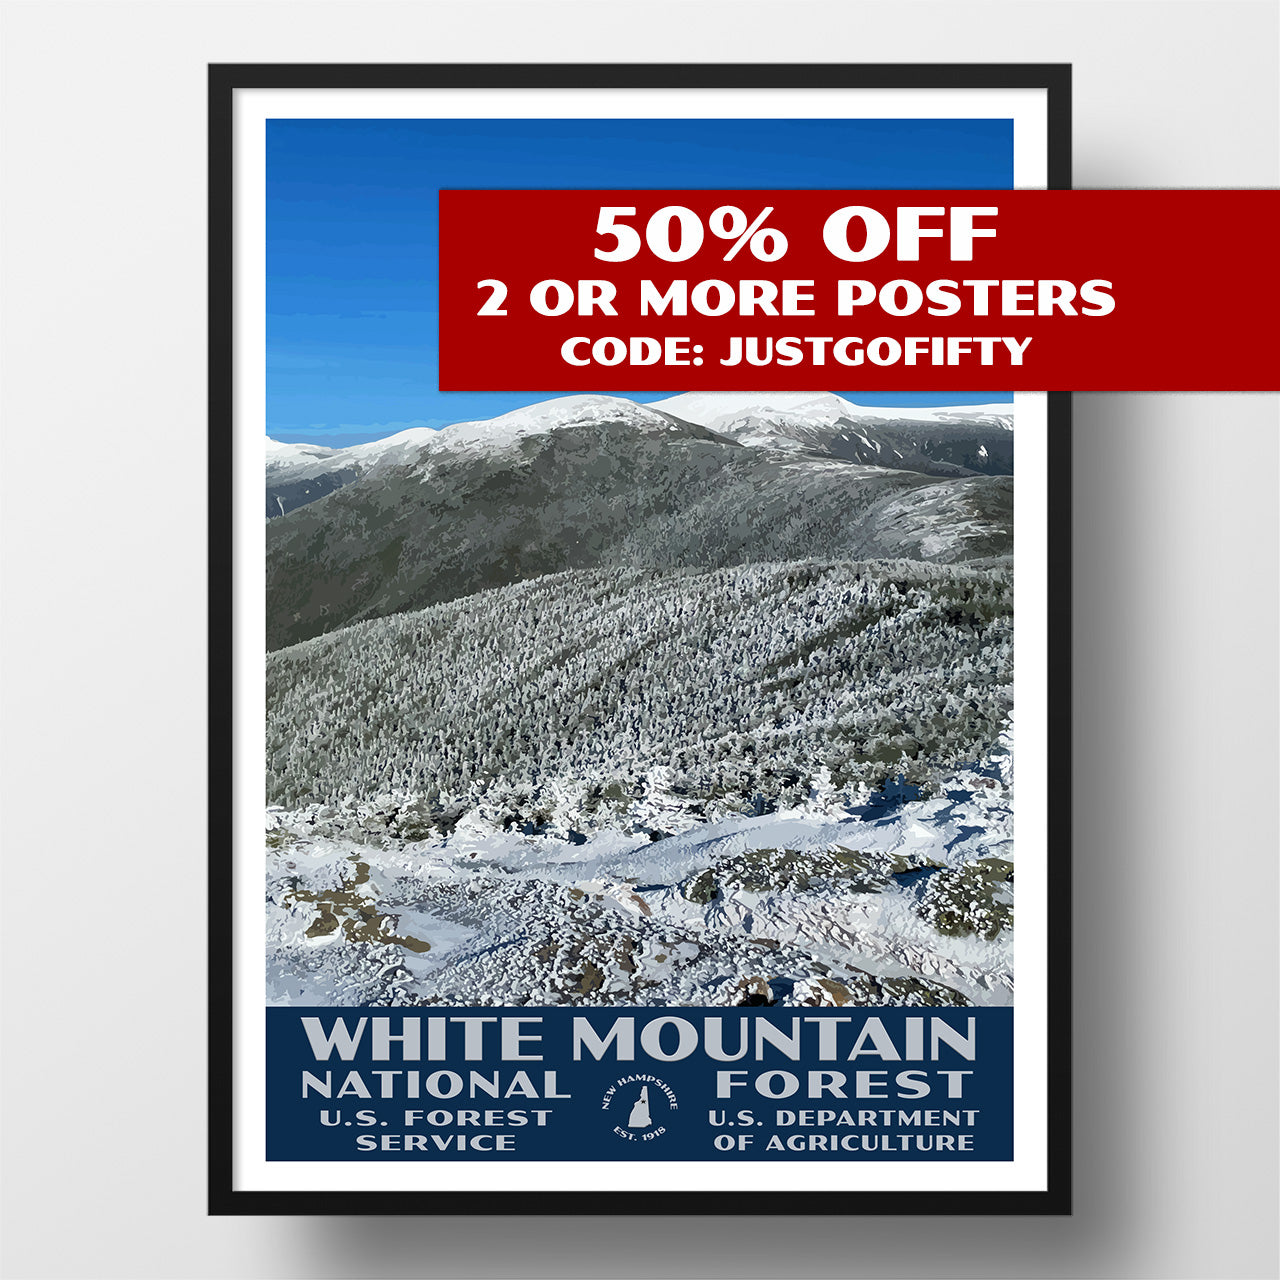 White Mountain National Forest poster